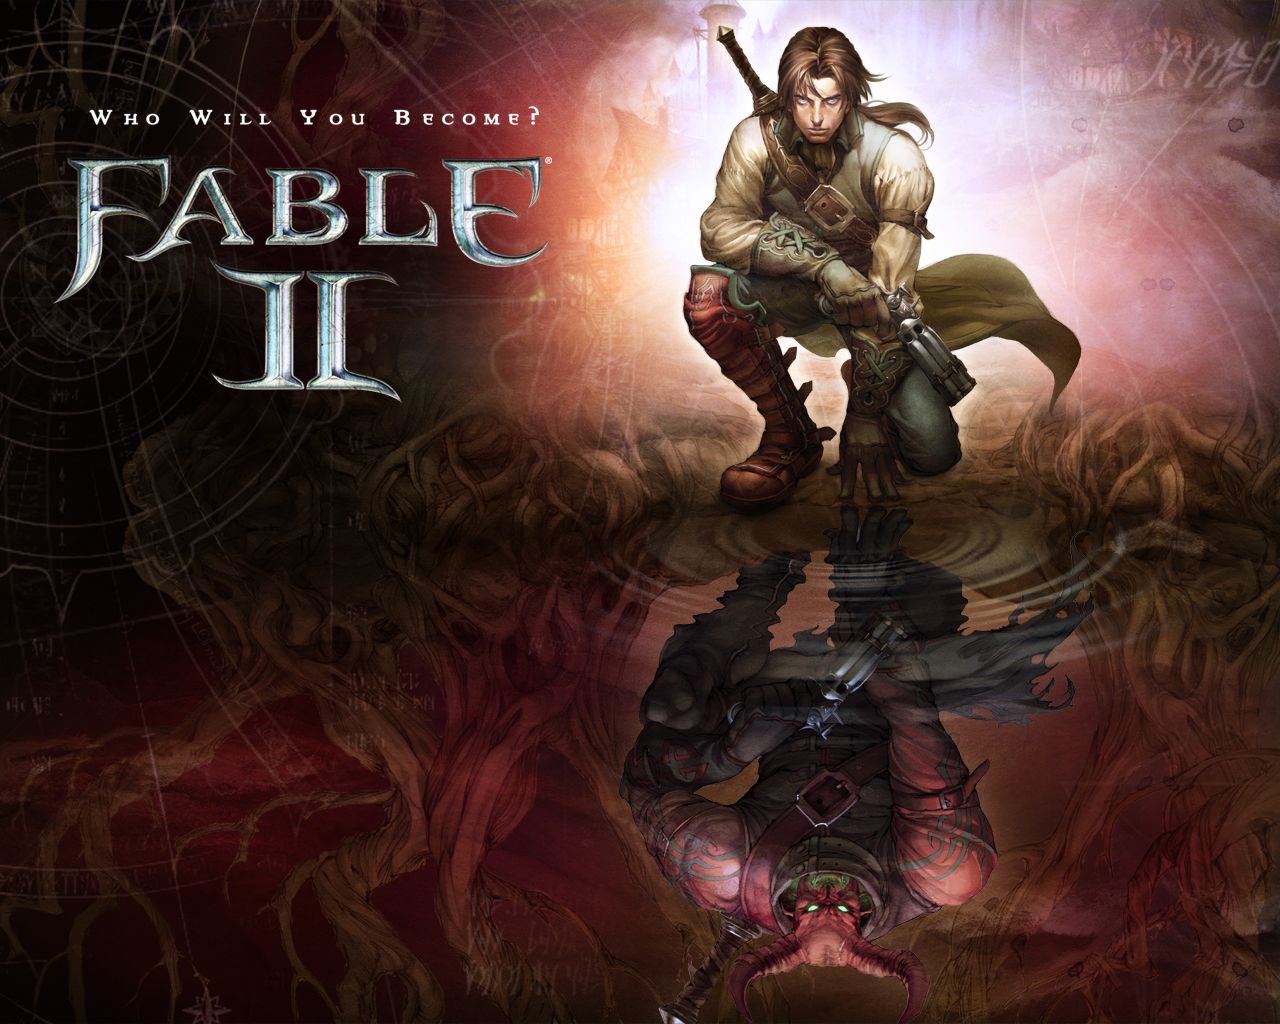 download fable is